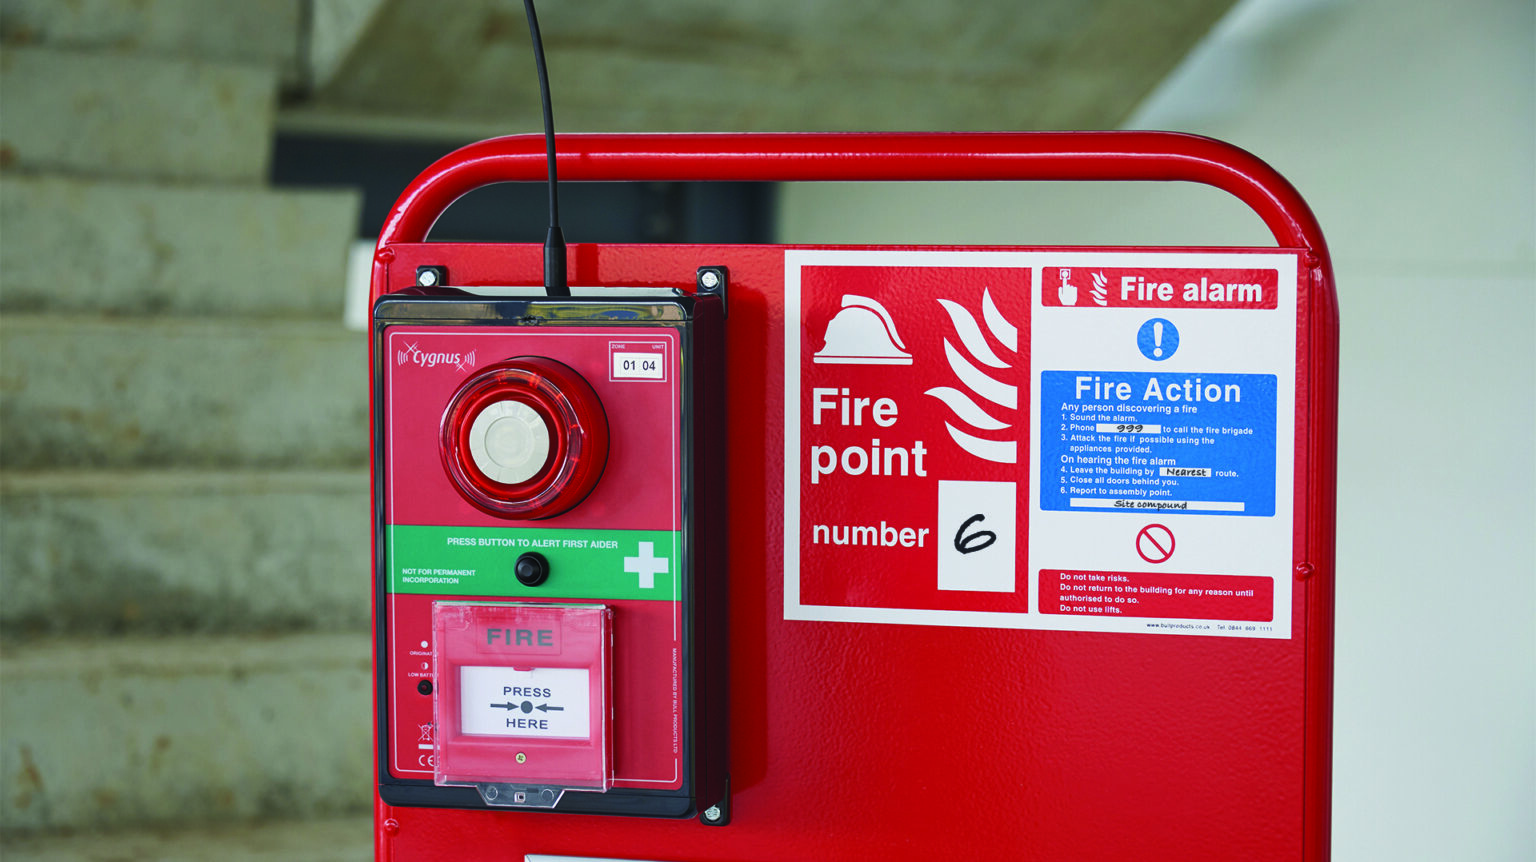 Your first aid and fire alarm site solution